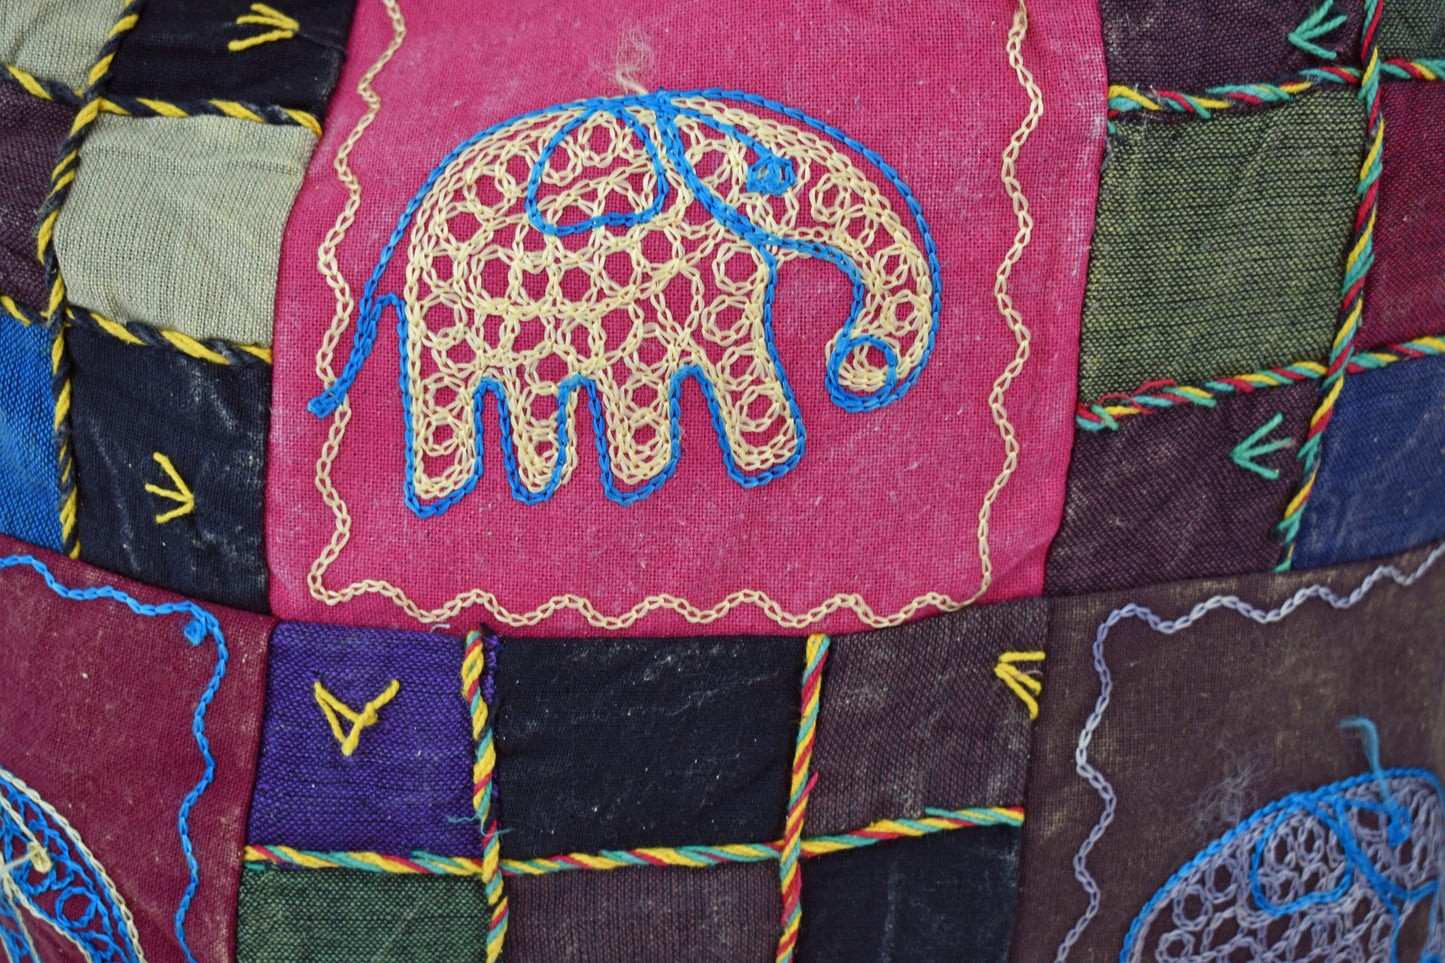 Embroidered Elephant Monk Bag